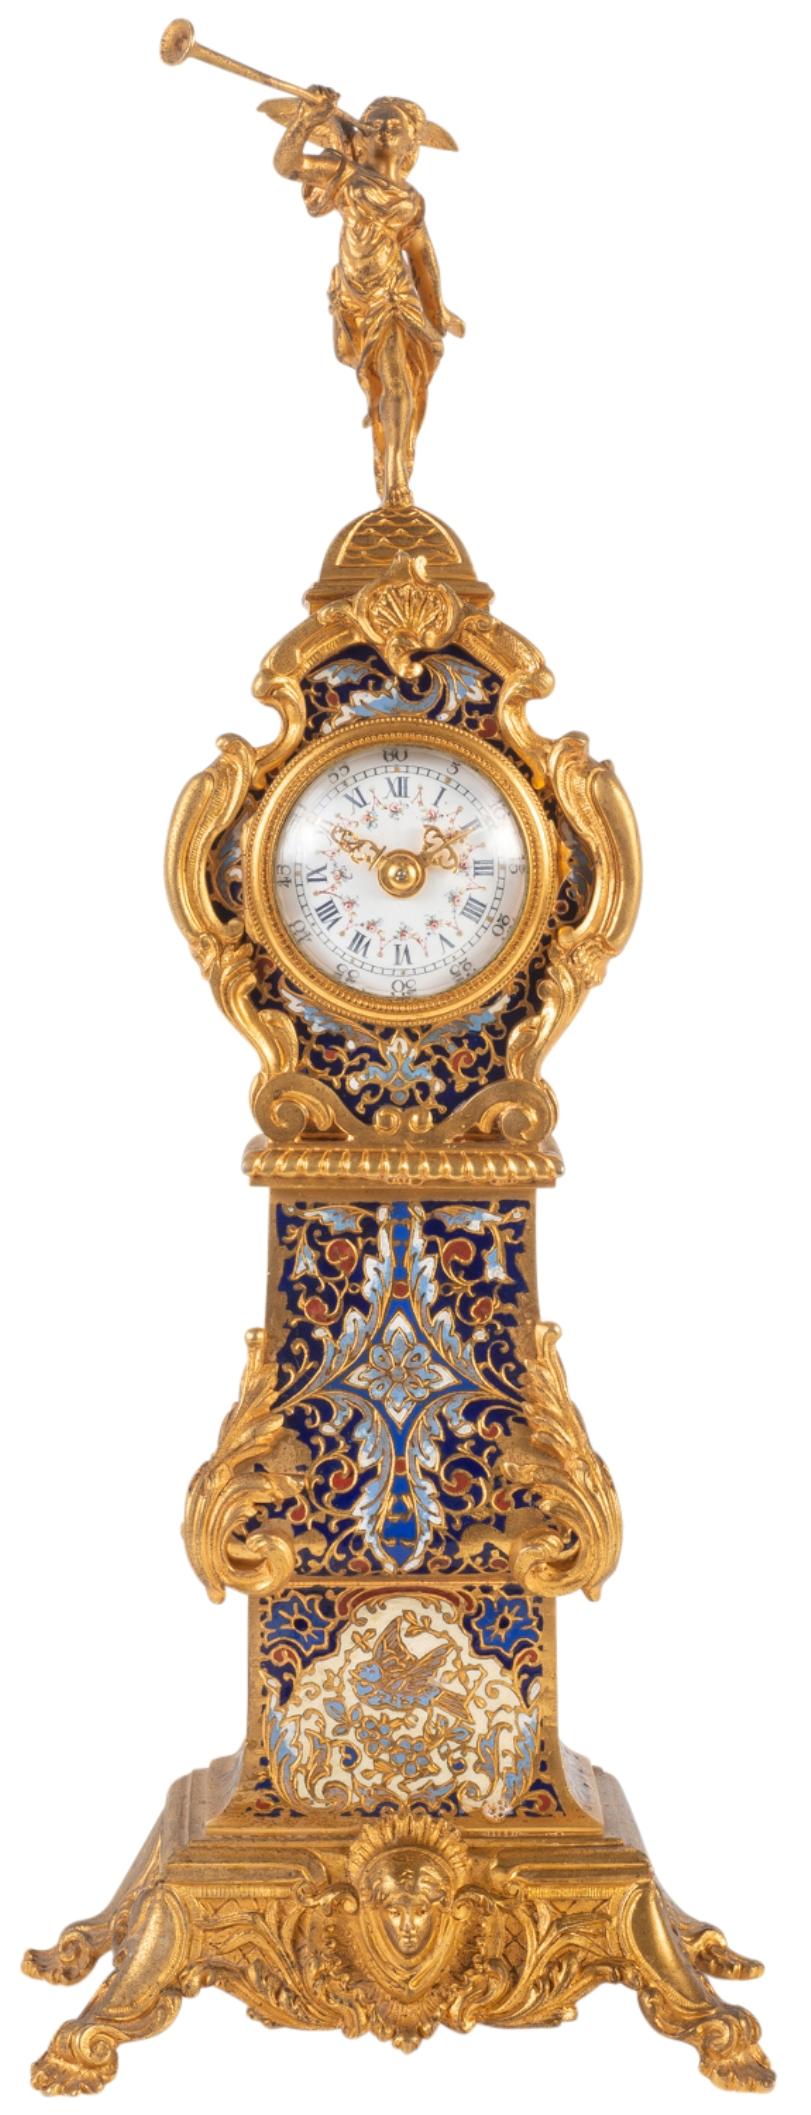 A very good quality late 19th century French gilded ormolu and champlevé enamel mantel clock in the form of a miniature longcase clock. The finial to the top being a cherub blowing a trumpet, foliate C-scrolling decoration, bold blue ground colours